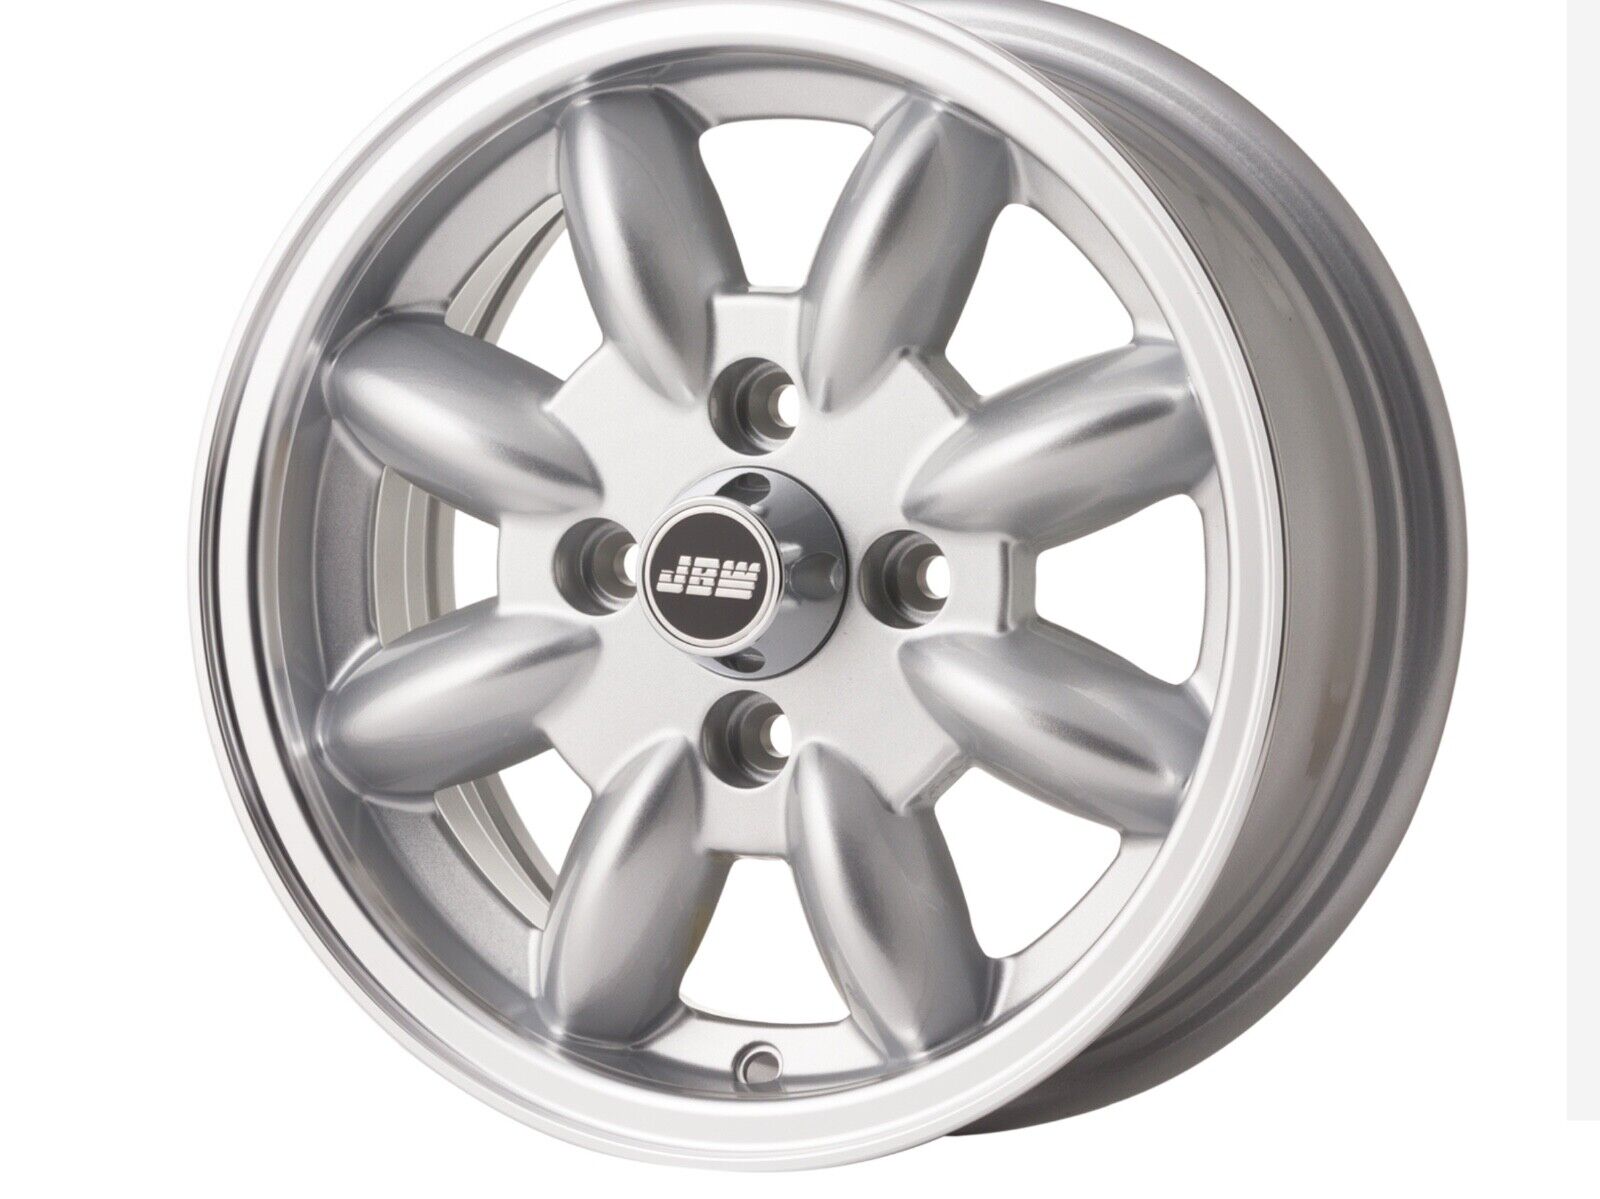 New Triumph Spitfire 5x13 Alloy Wheels set of 4 Silver With a Polished Rim